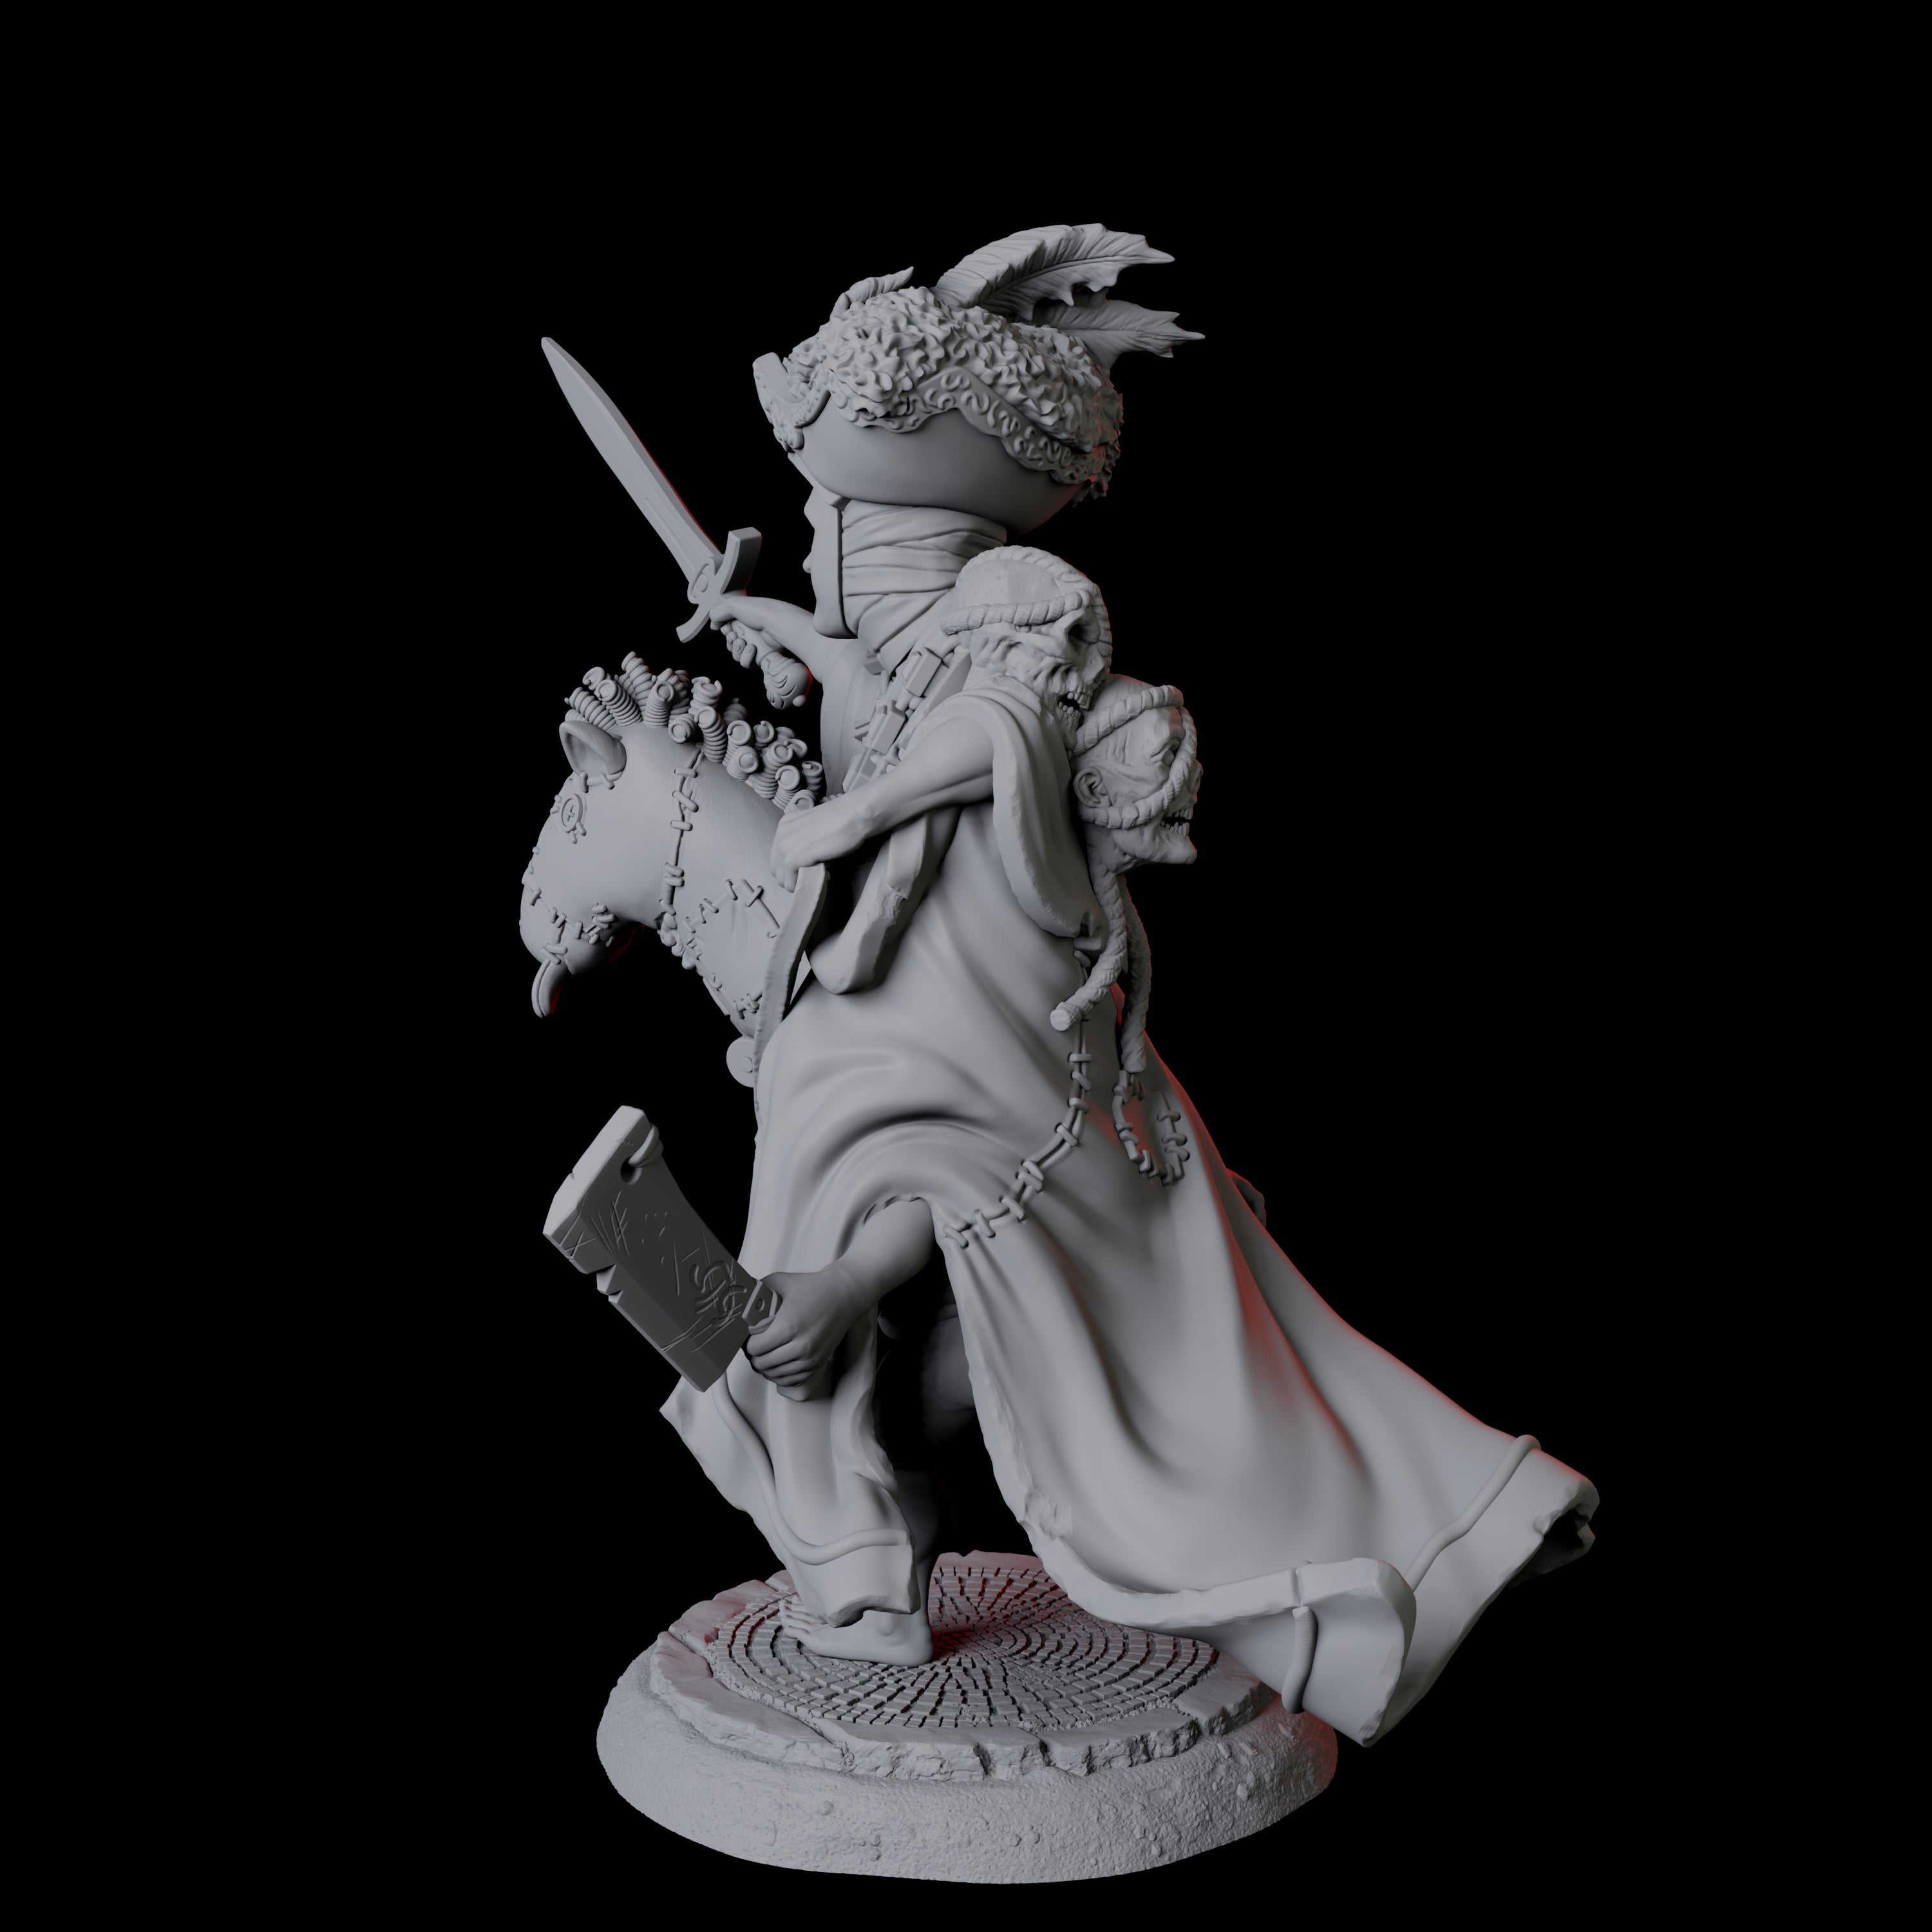 Weird Halfling Jester Pair D Miniature for Dungeons and Dragons, Pathfinder or other TTRPGs